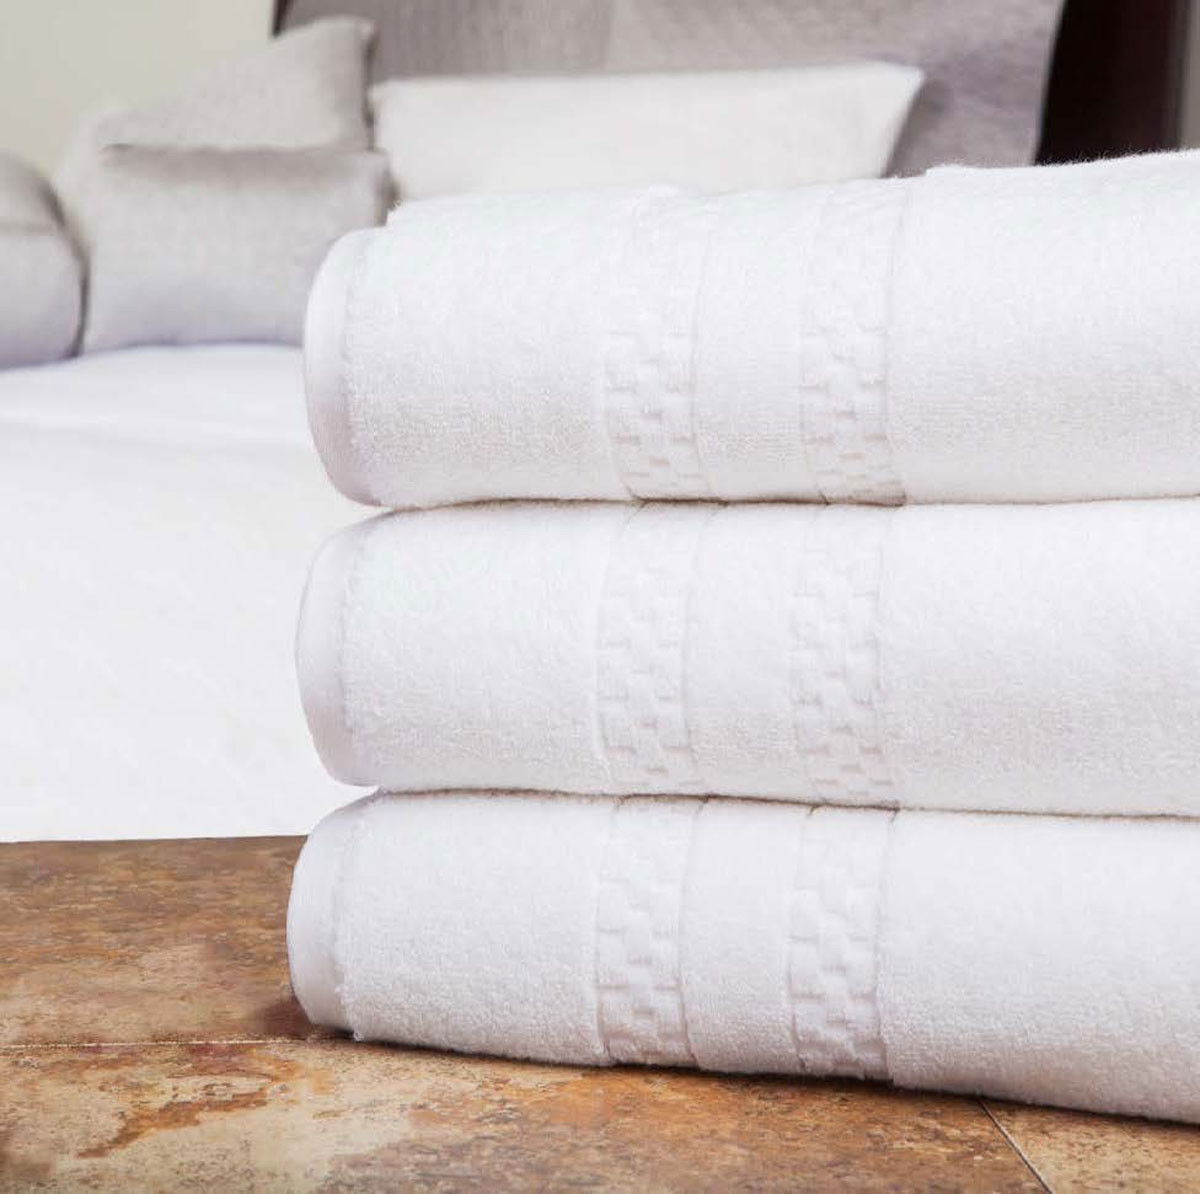 What's the best way to care for my Villa di Sorrento towels?